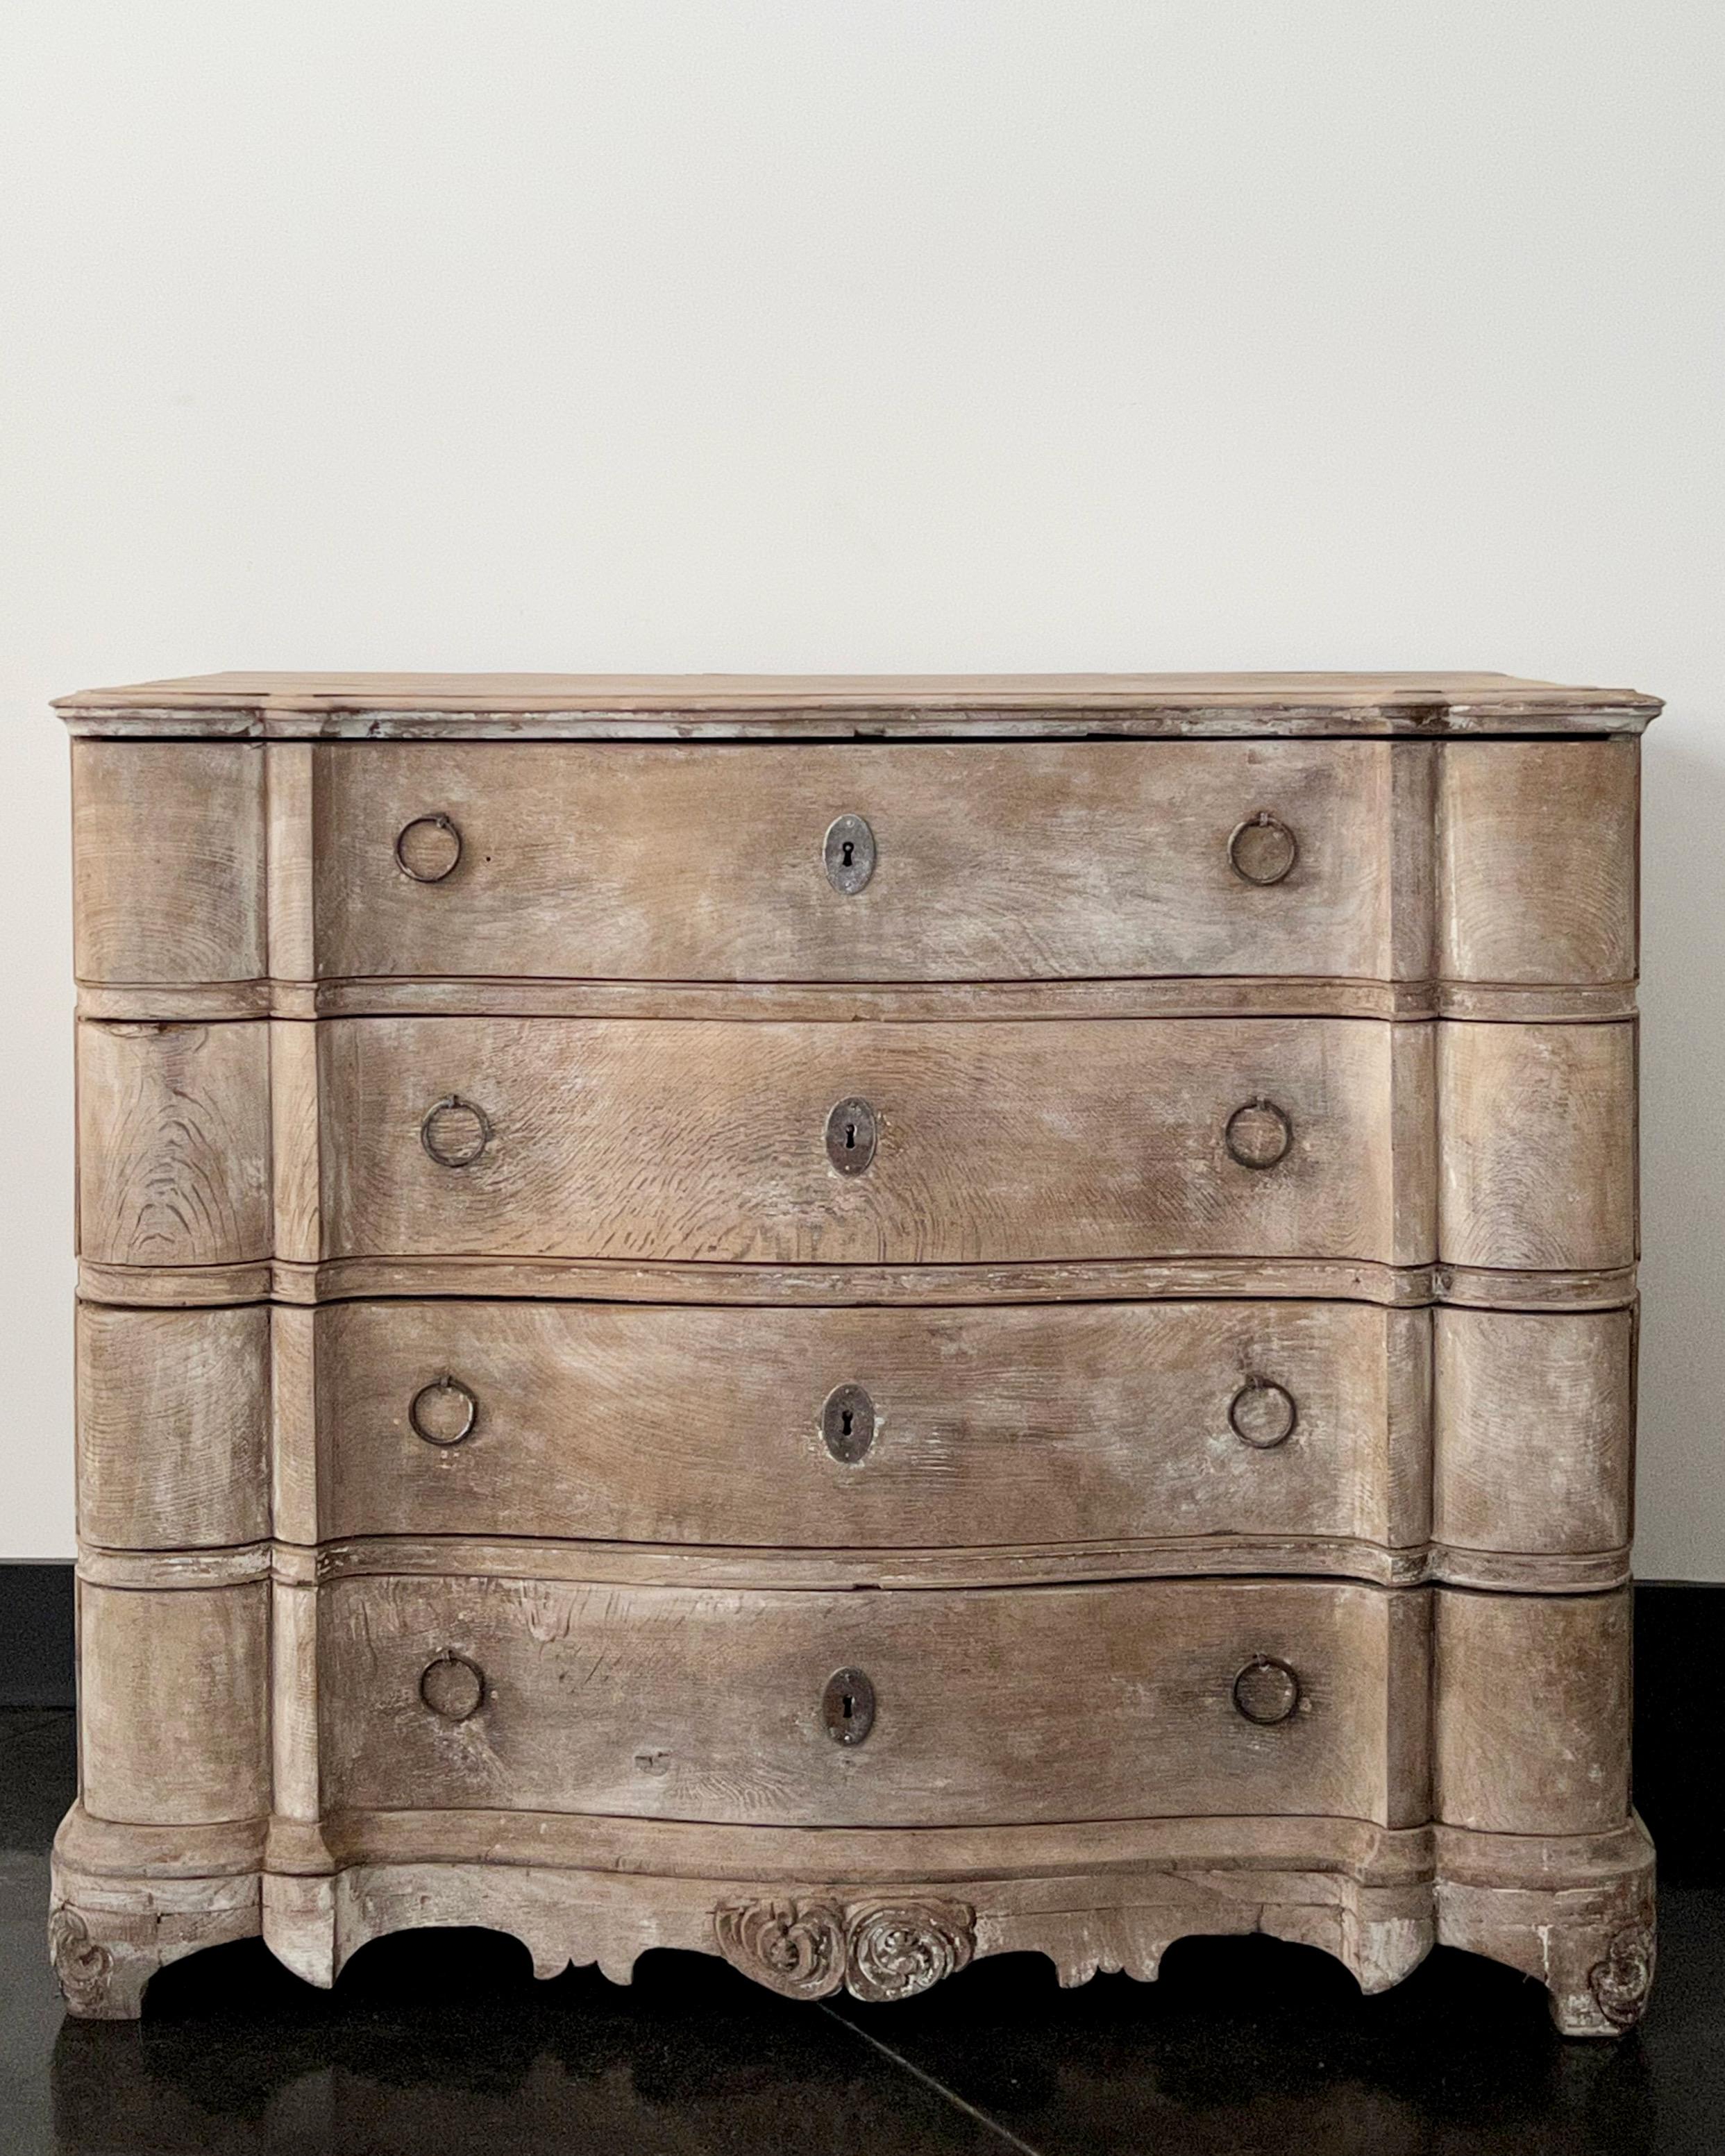 Bleached 18th Century Dutch Serpentine Front Chest of Drawers